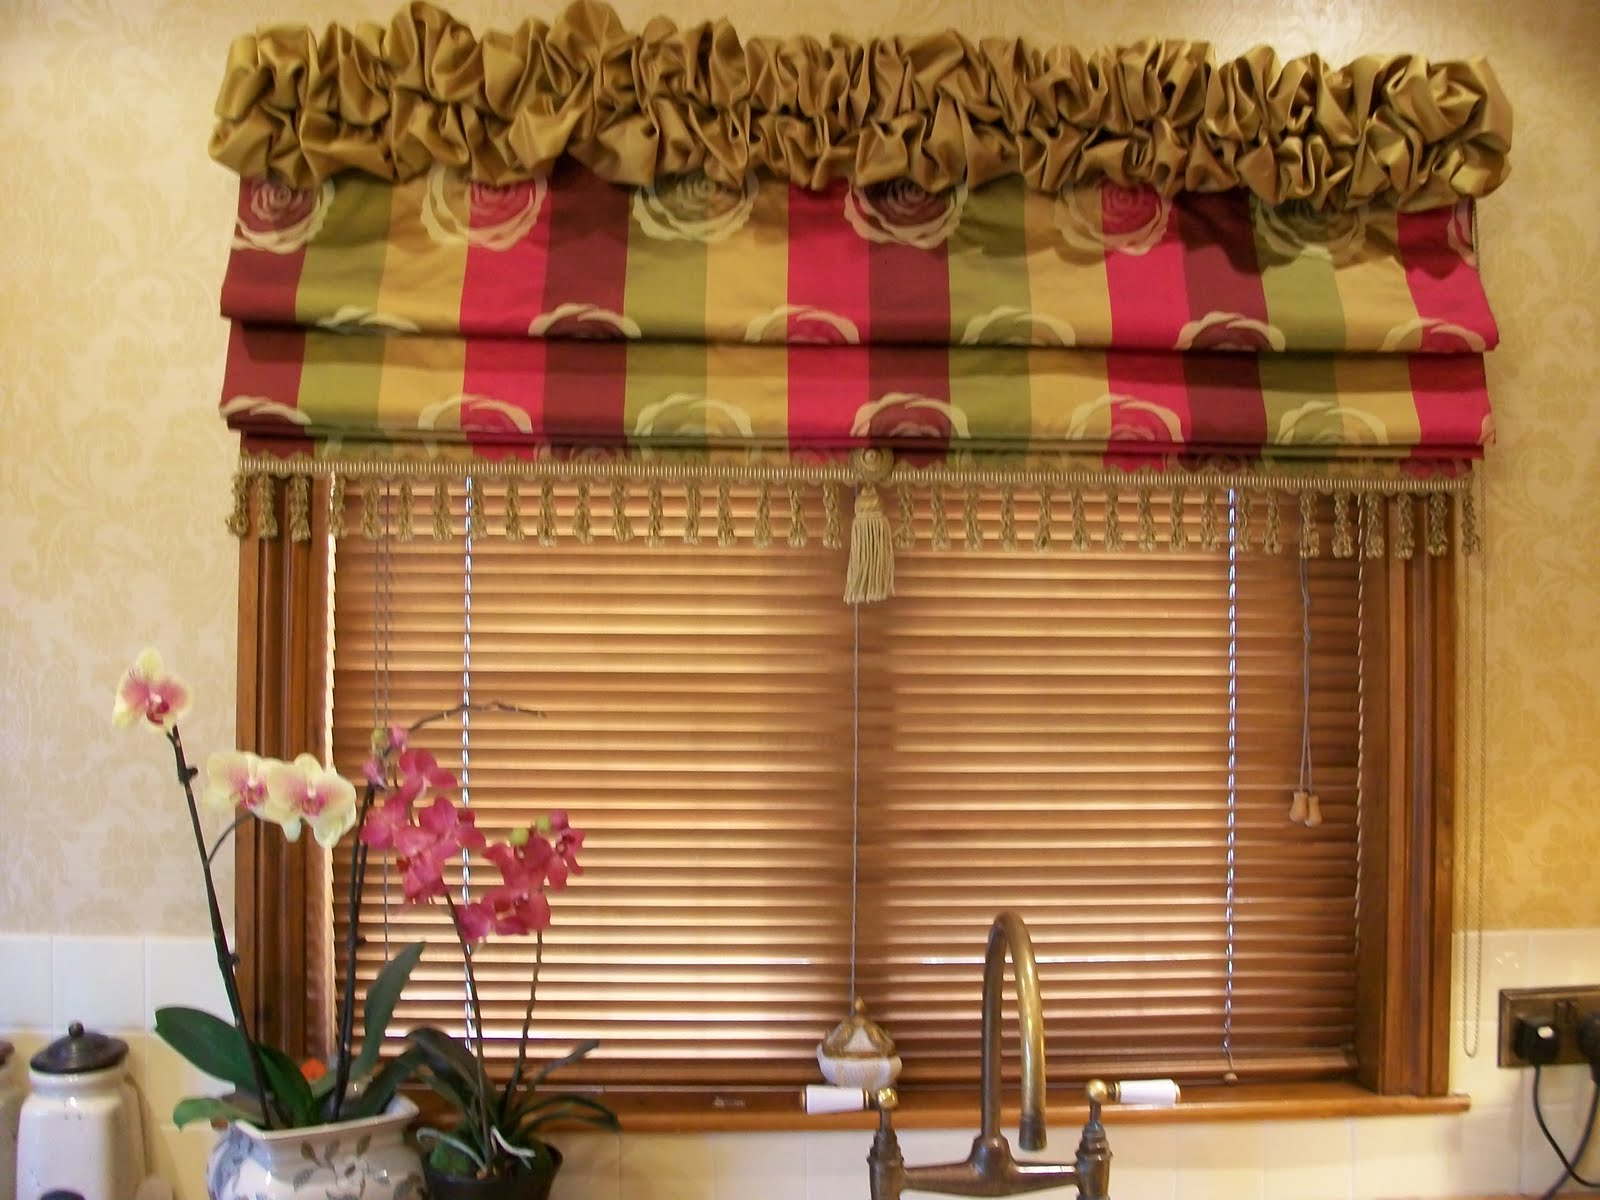 HOW TO MAKE ROMAN BLINDS OR HOW TO MAKE A ROMAN BLIND